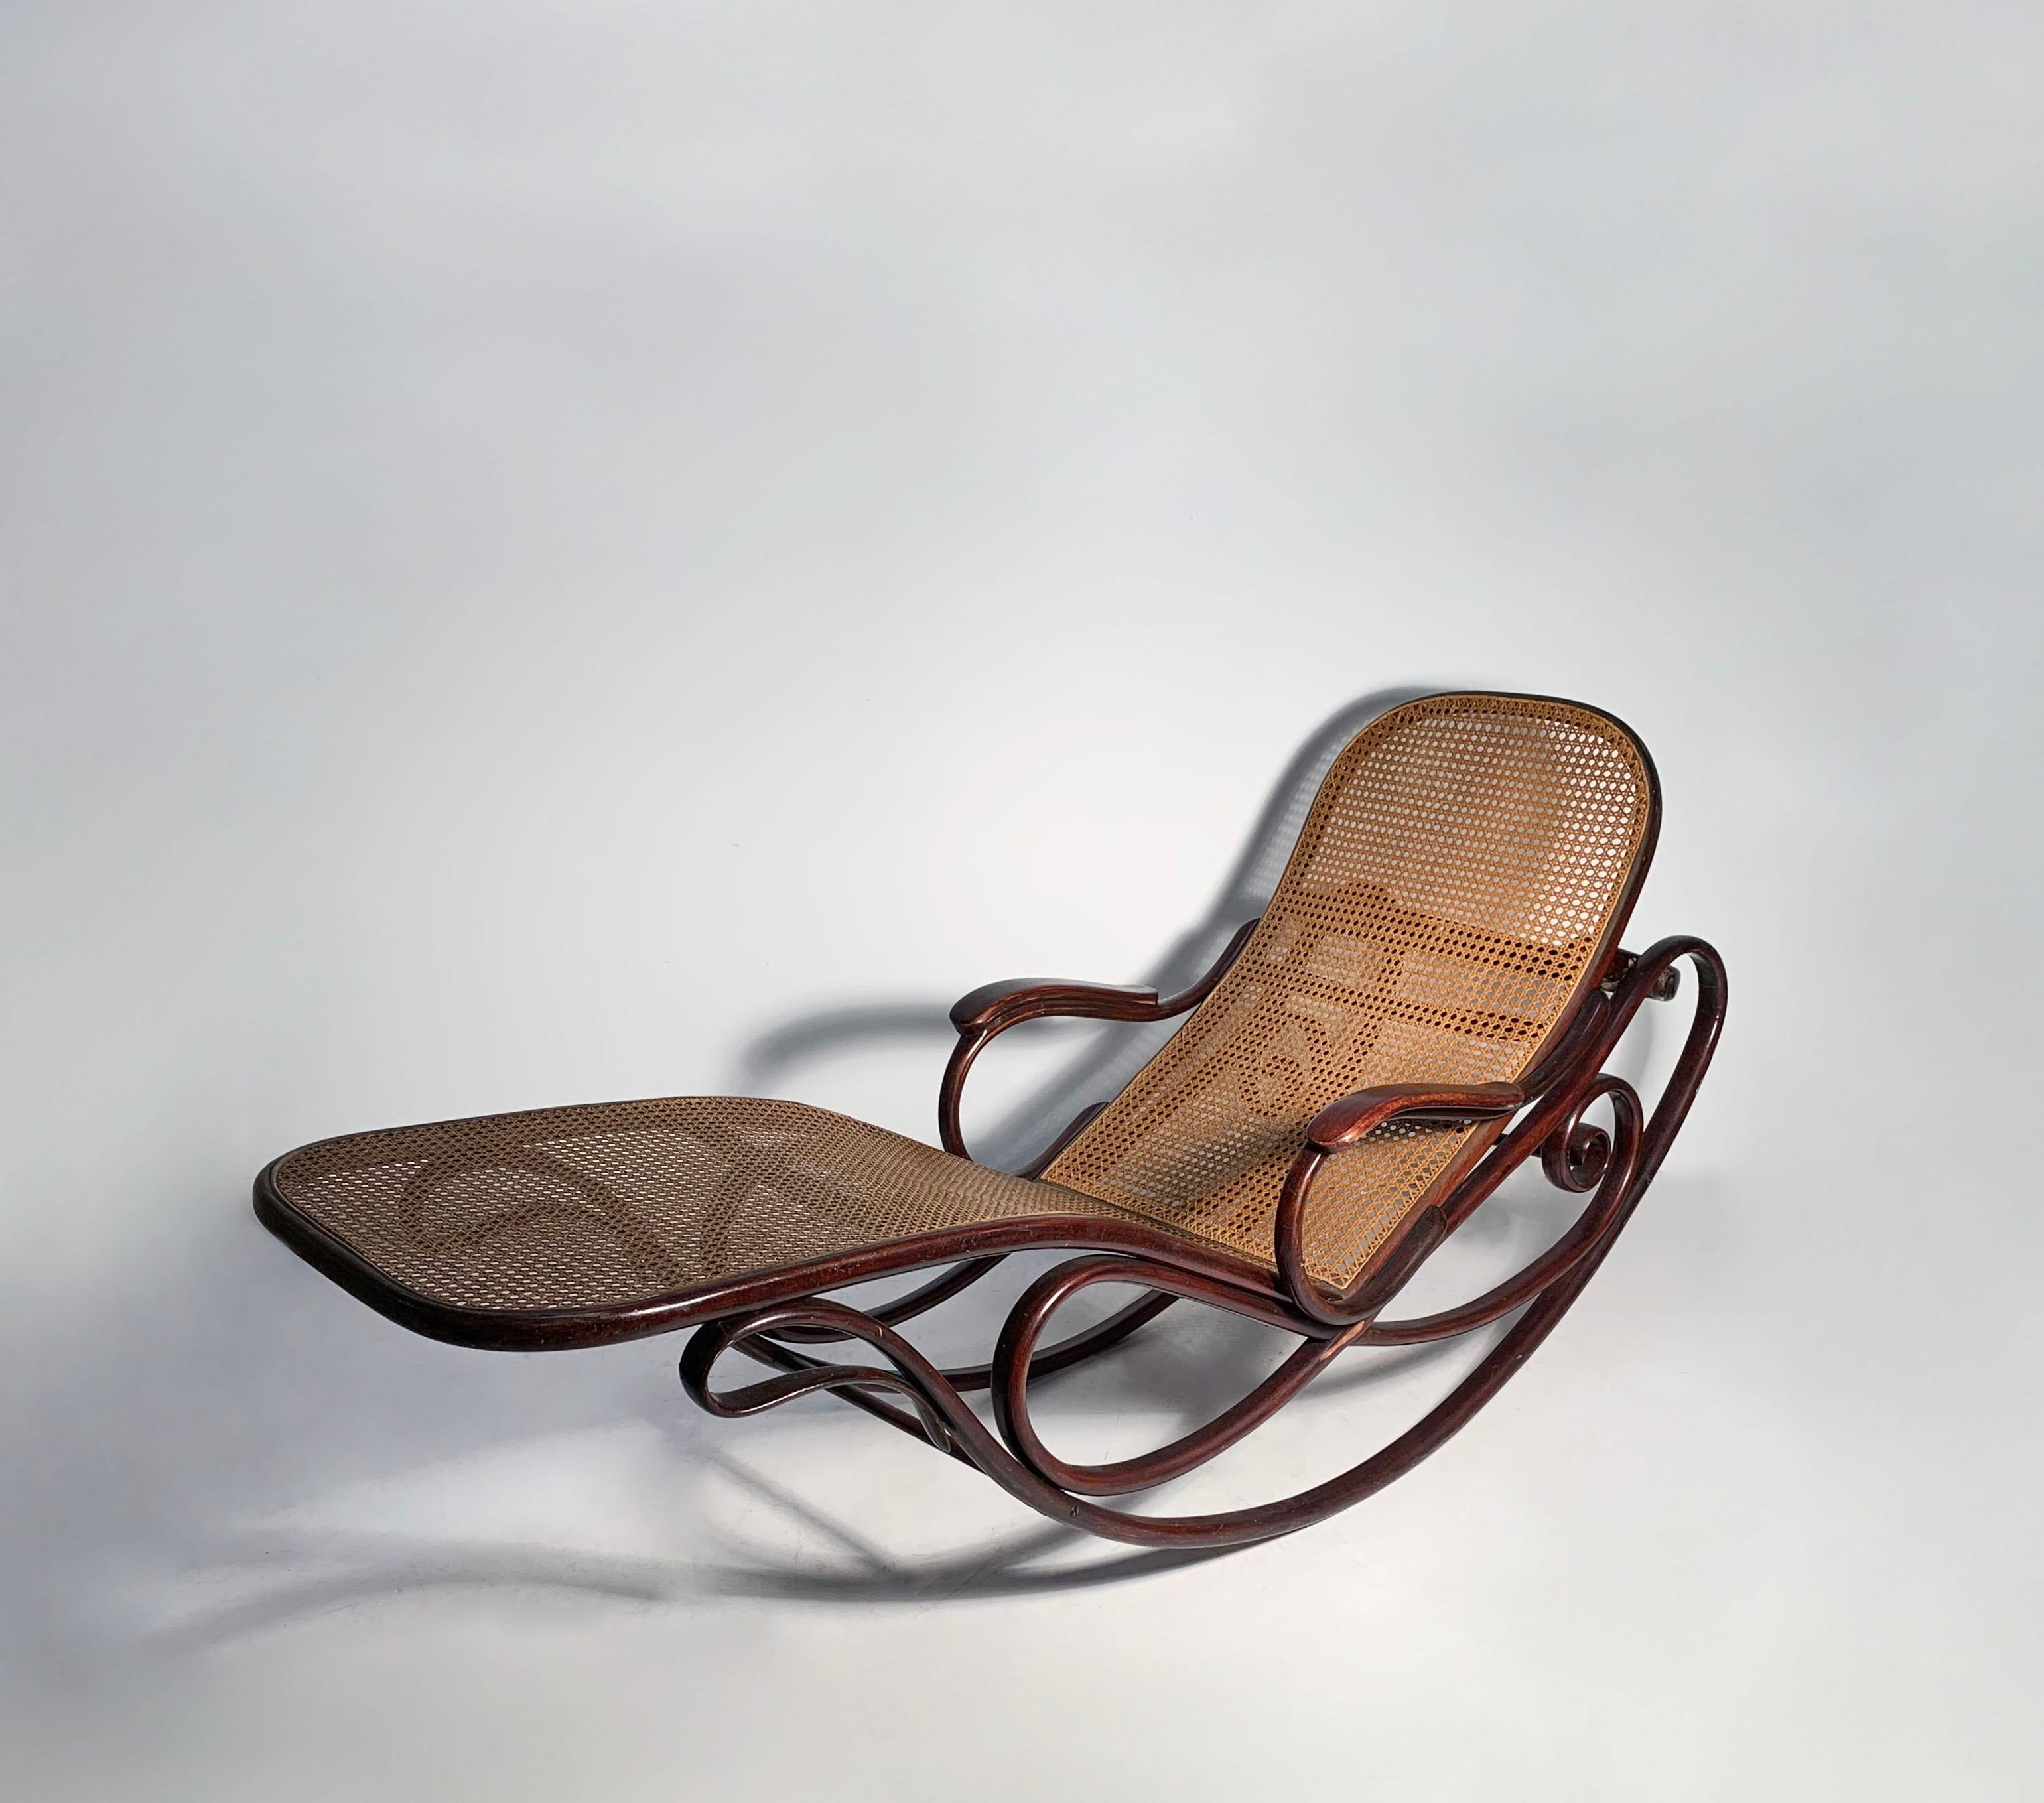 Art Nouveau Gebruder Thonet Bentwood Rocking Chaise Lounge Chair For Sale